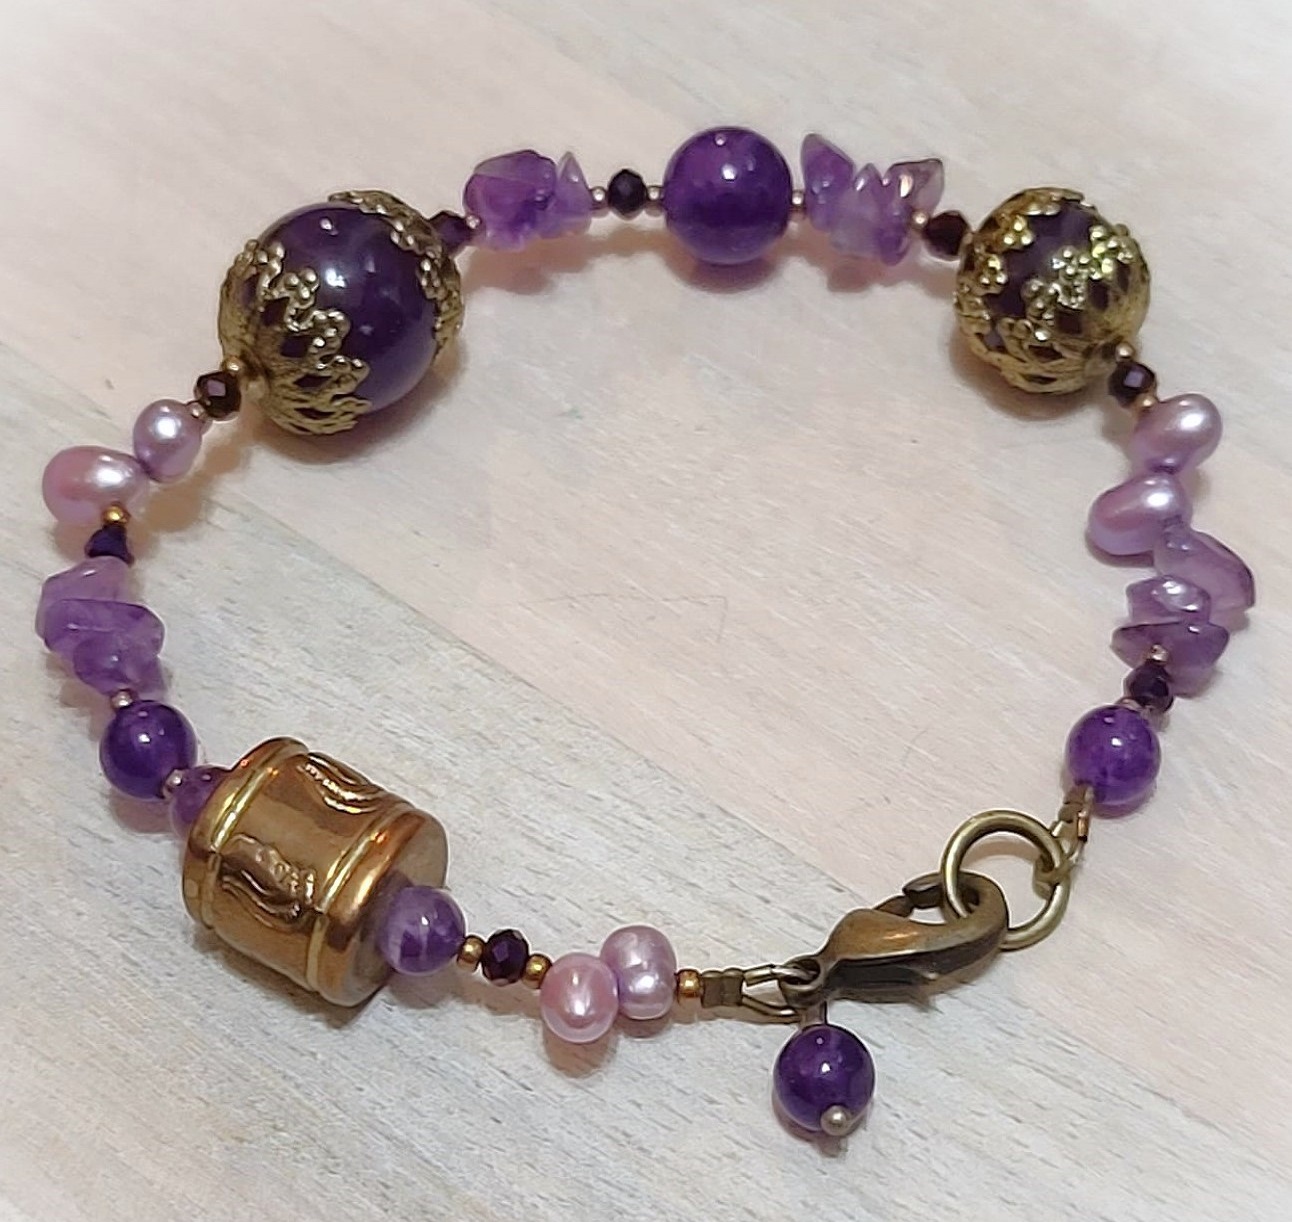 Amethyst and Jade Bracelet, handcrafted, and dyed lavendar pearl